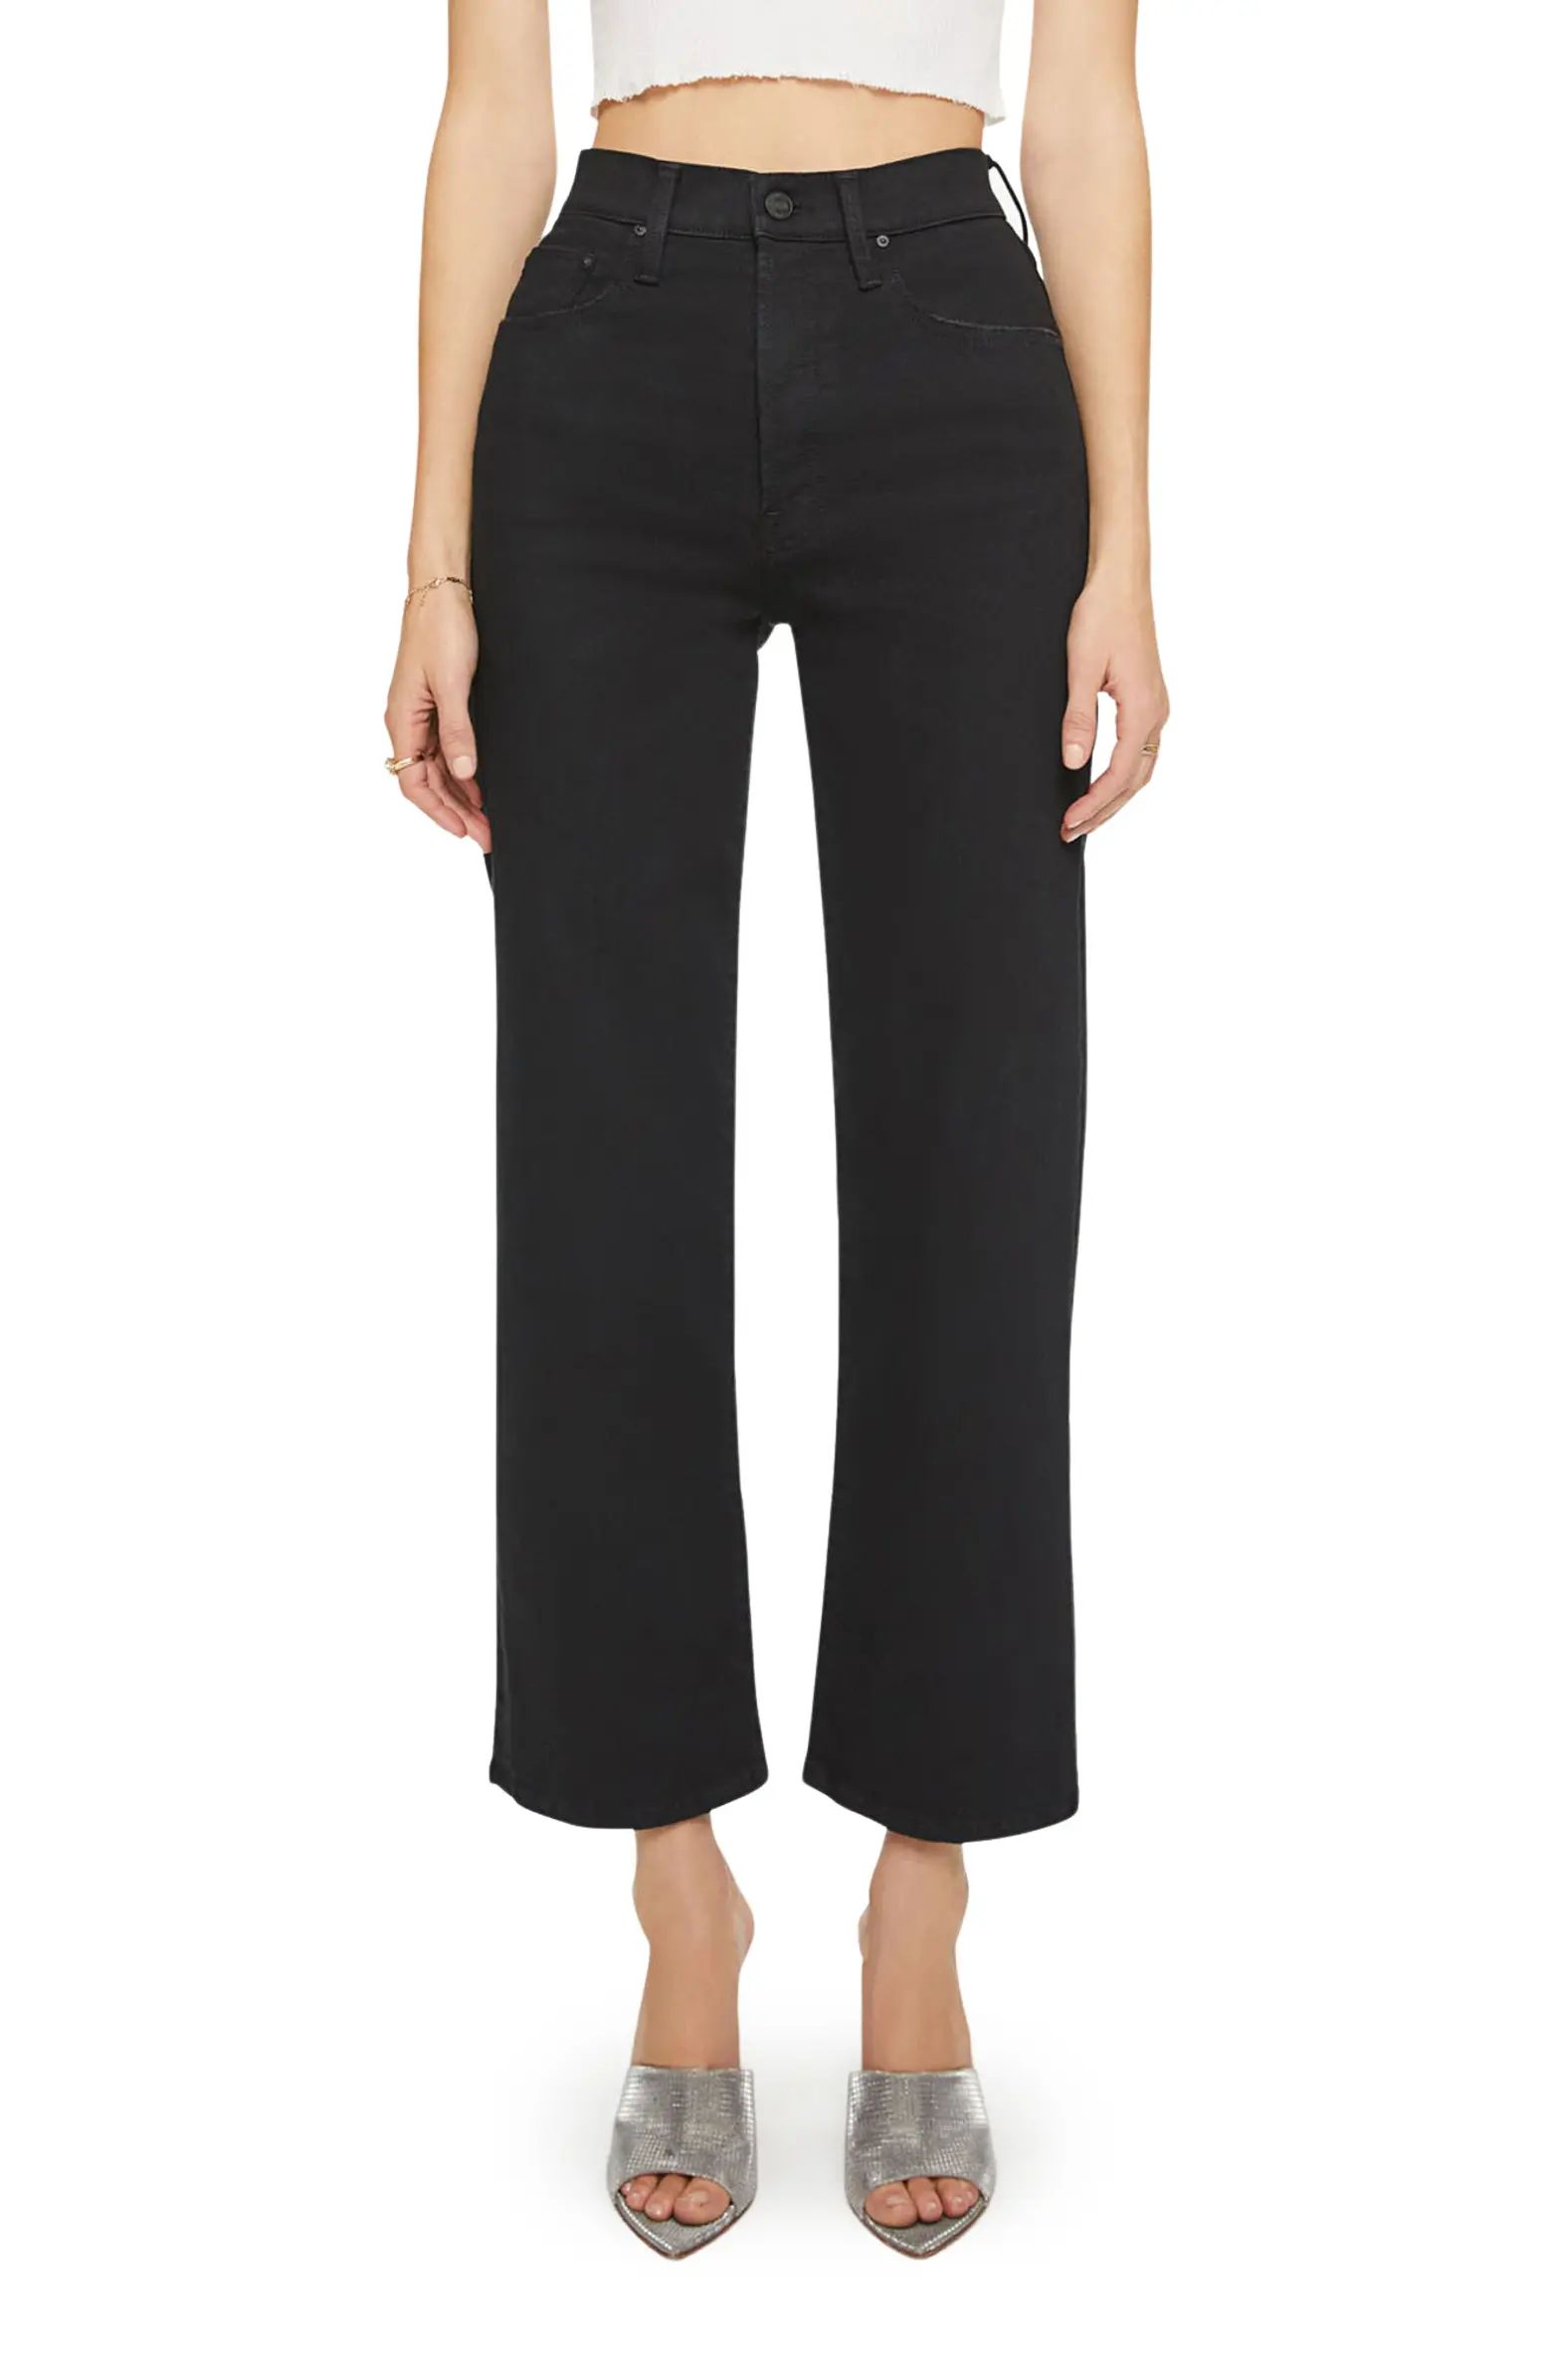 The Rambler High Waist Ankle Straight Leg JeansMOTHER | Nordstrom